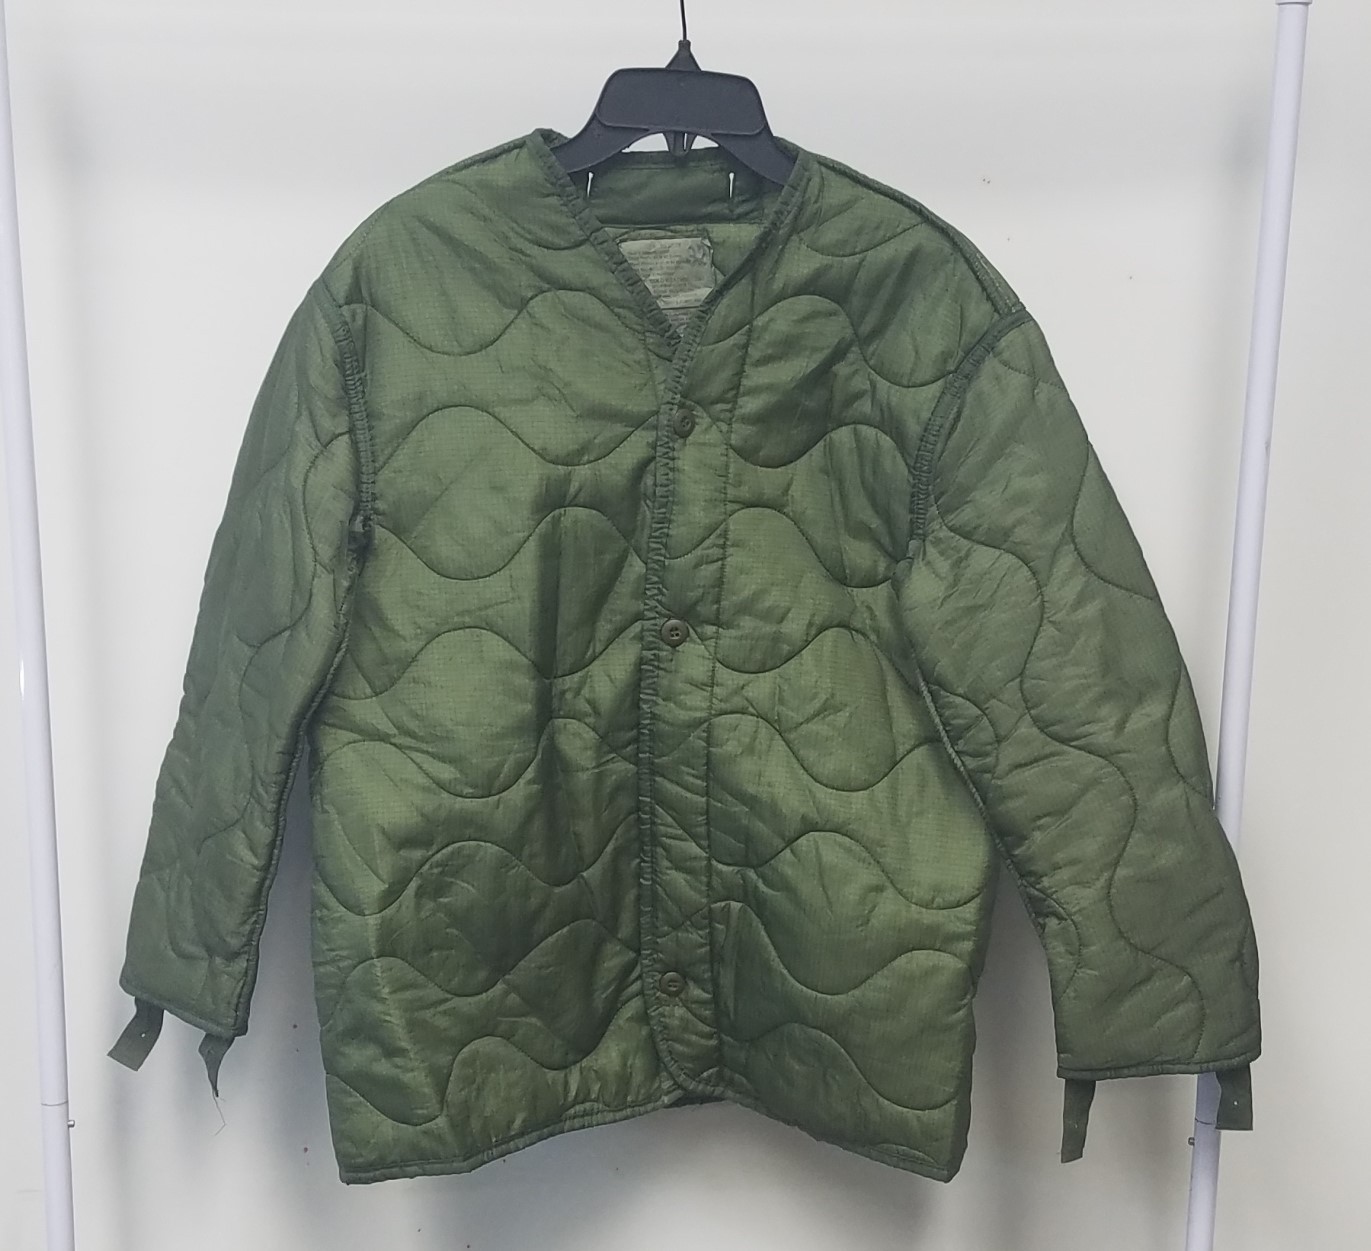 Used FAIR Condition Field Jacket Liner